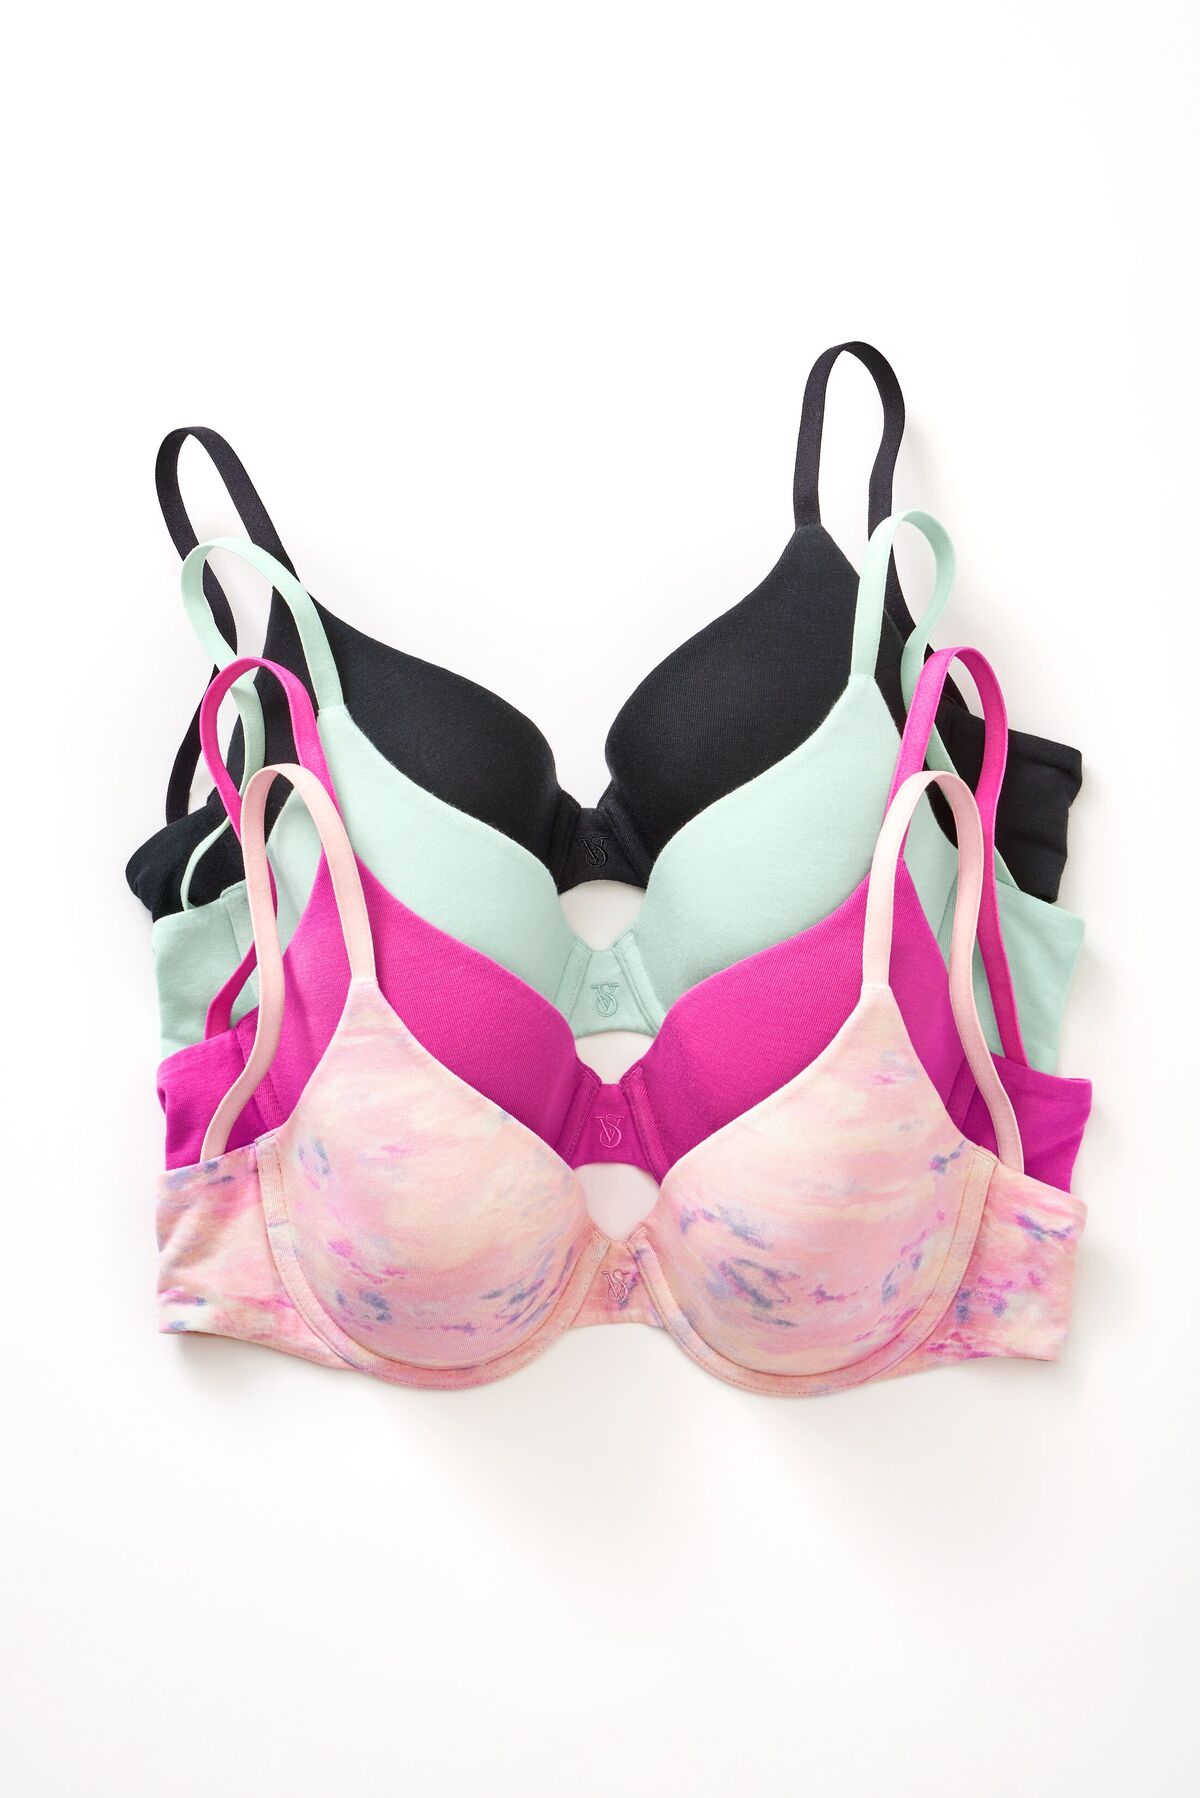 I used to work at Victoria's Secret - now I design bras that 'grow